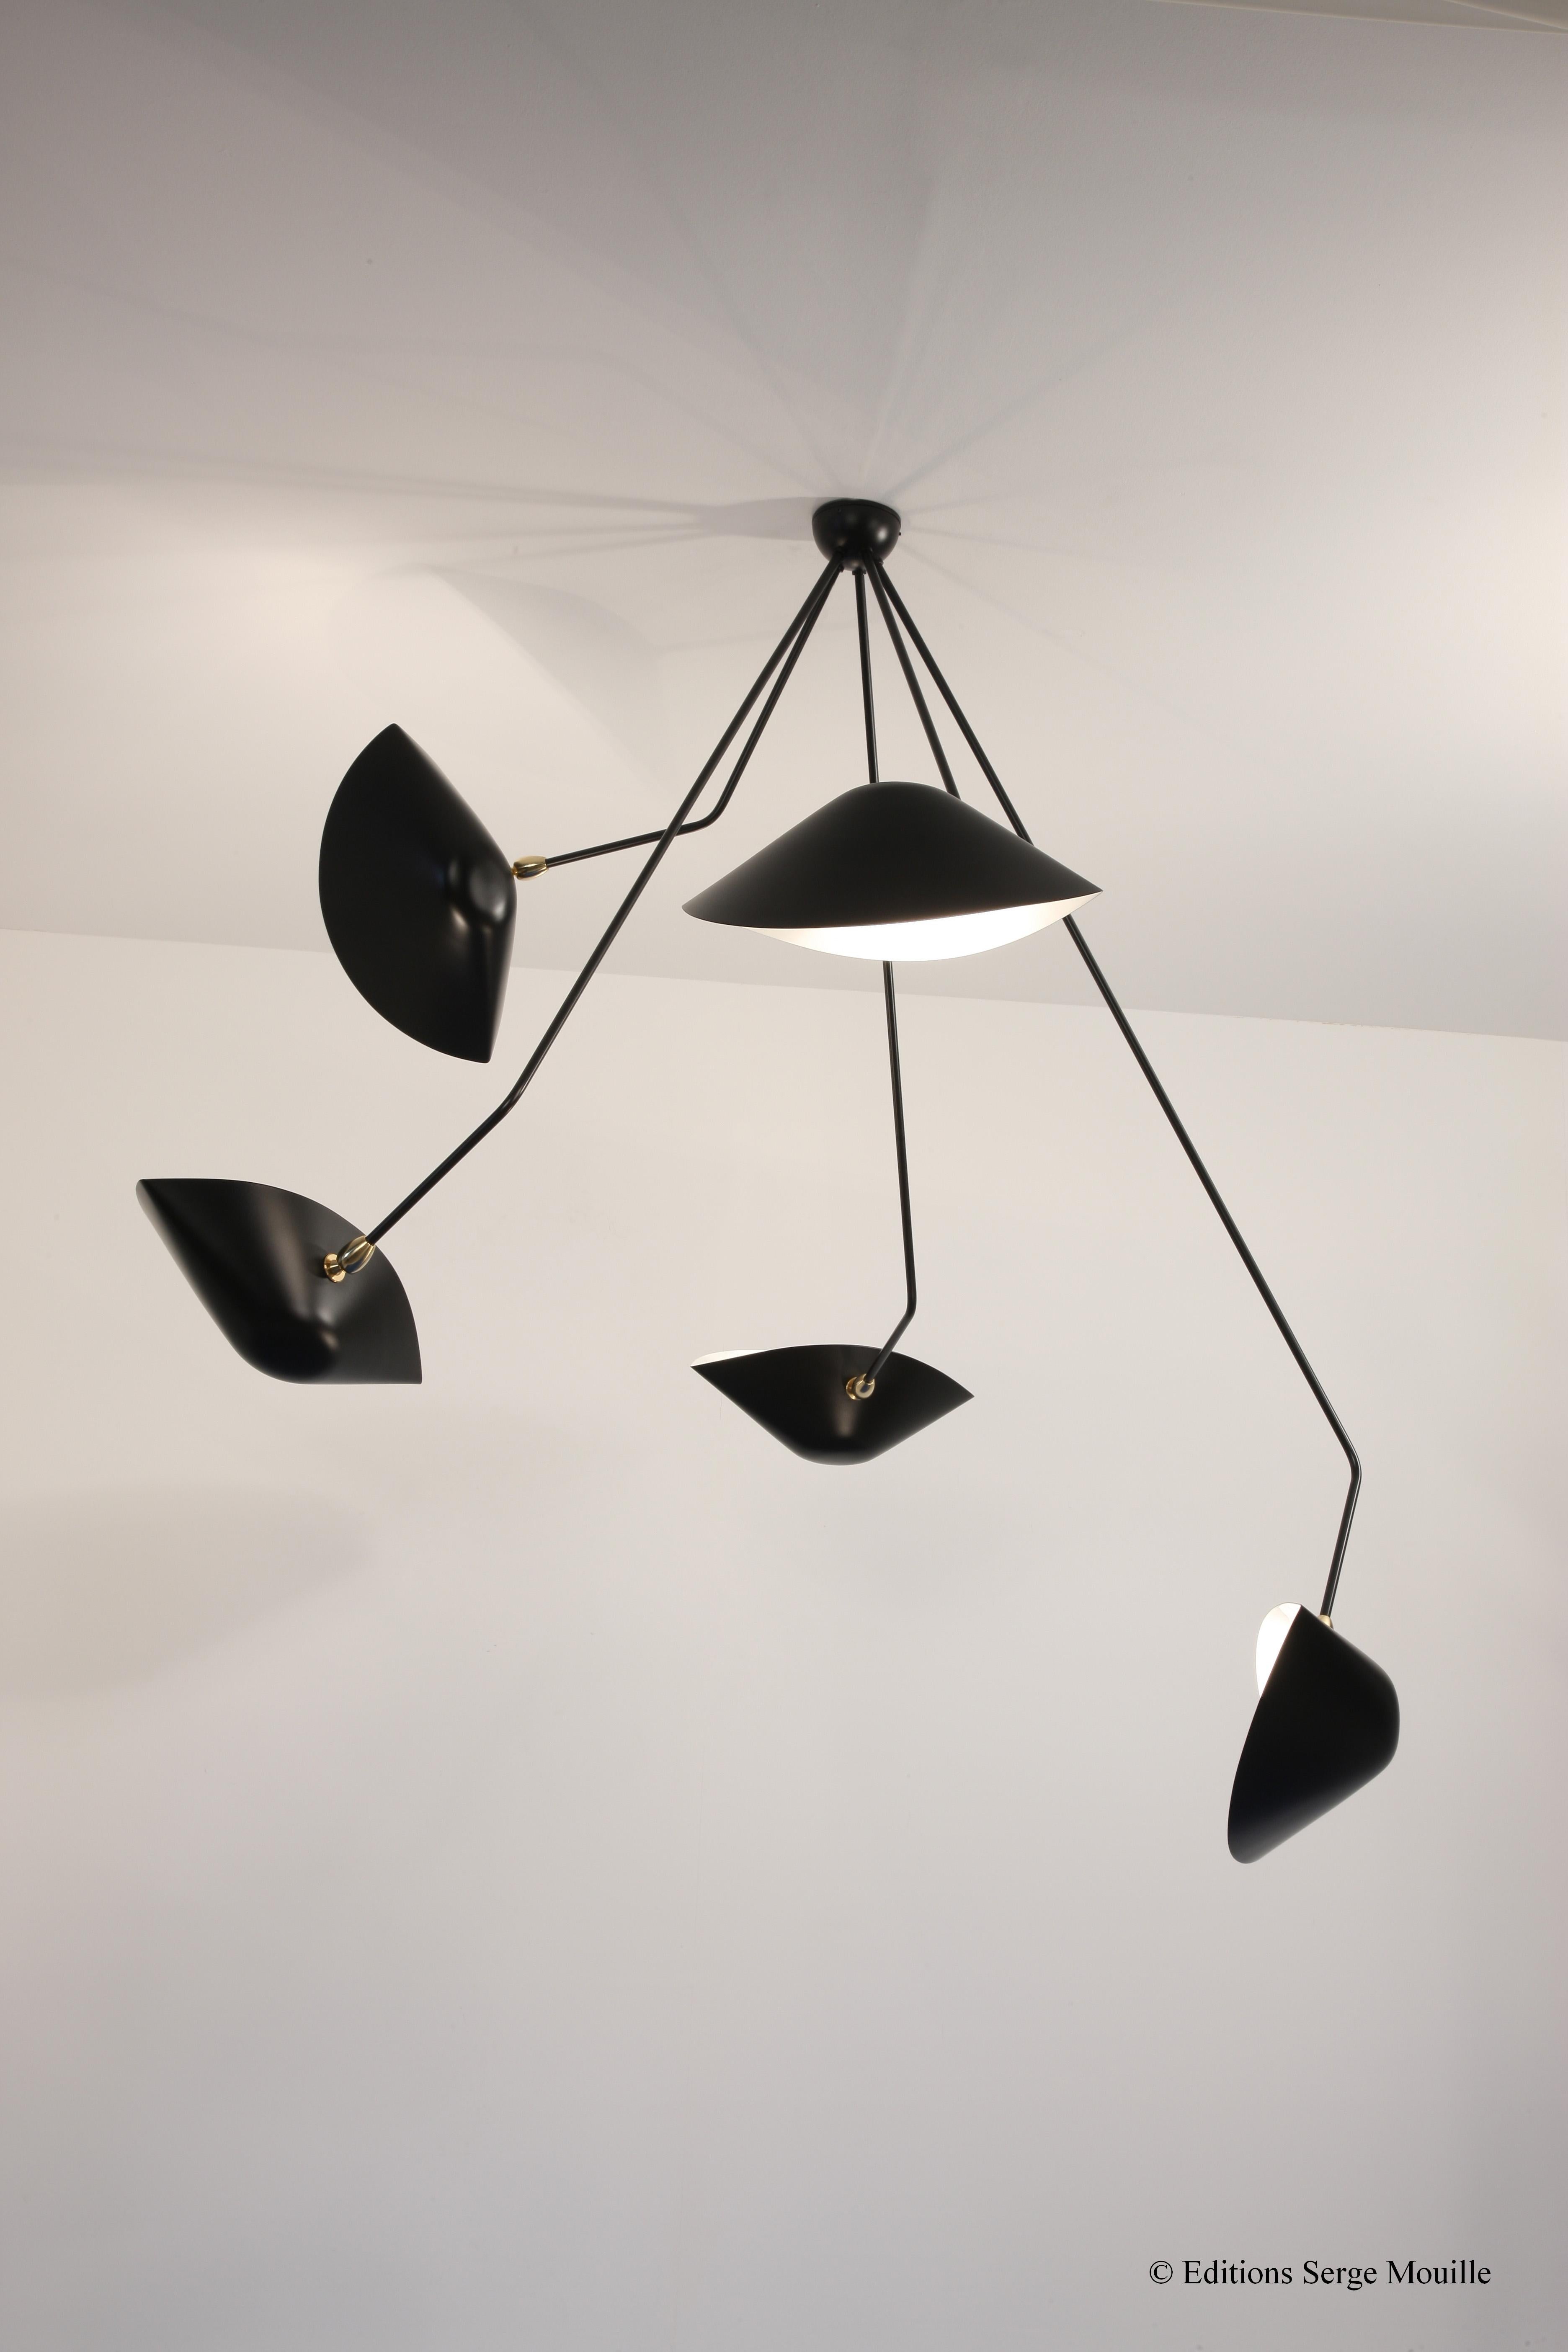 Large Serge Mouille 'Plafonnier Araignée 5 Bras Cassés' ceiling lamp in black.

Originally designed in 1958, this iconic chandelier is still made by Edition Serge Mouille in France using many of the same small-scale manufacturing techniques and